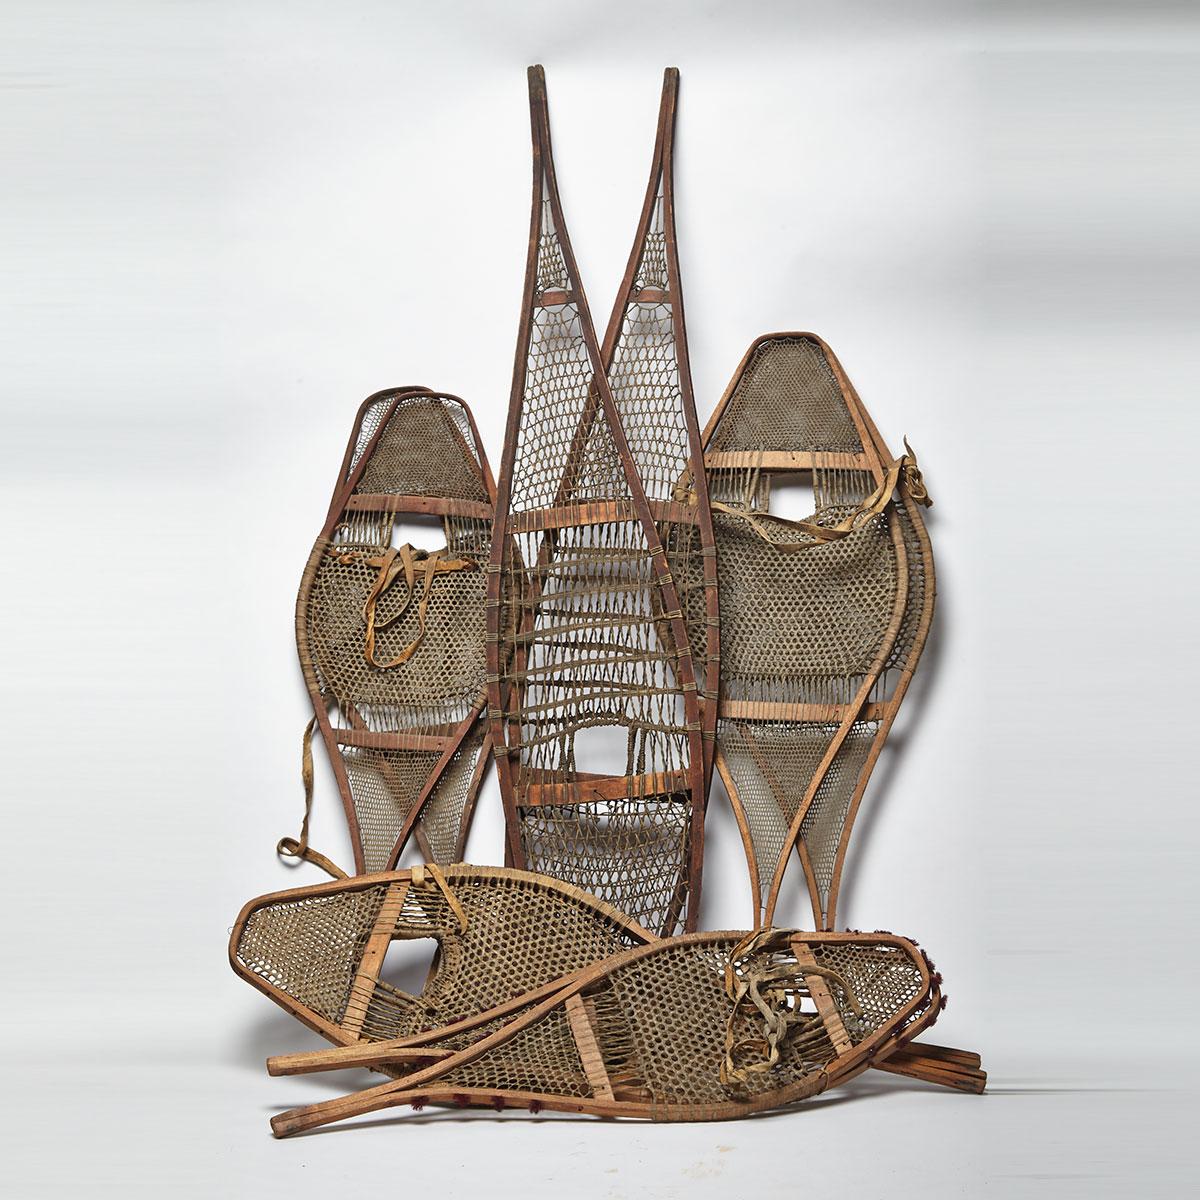 Five Pairs of Snow Shoes, 18th or 19th century or earlier